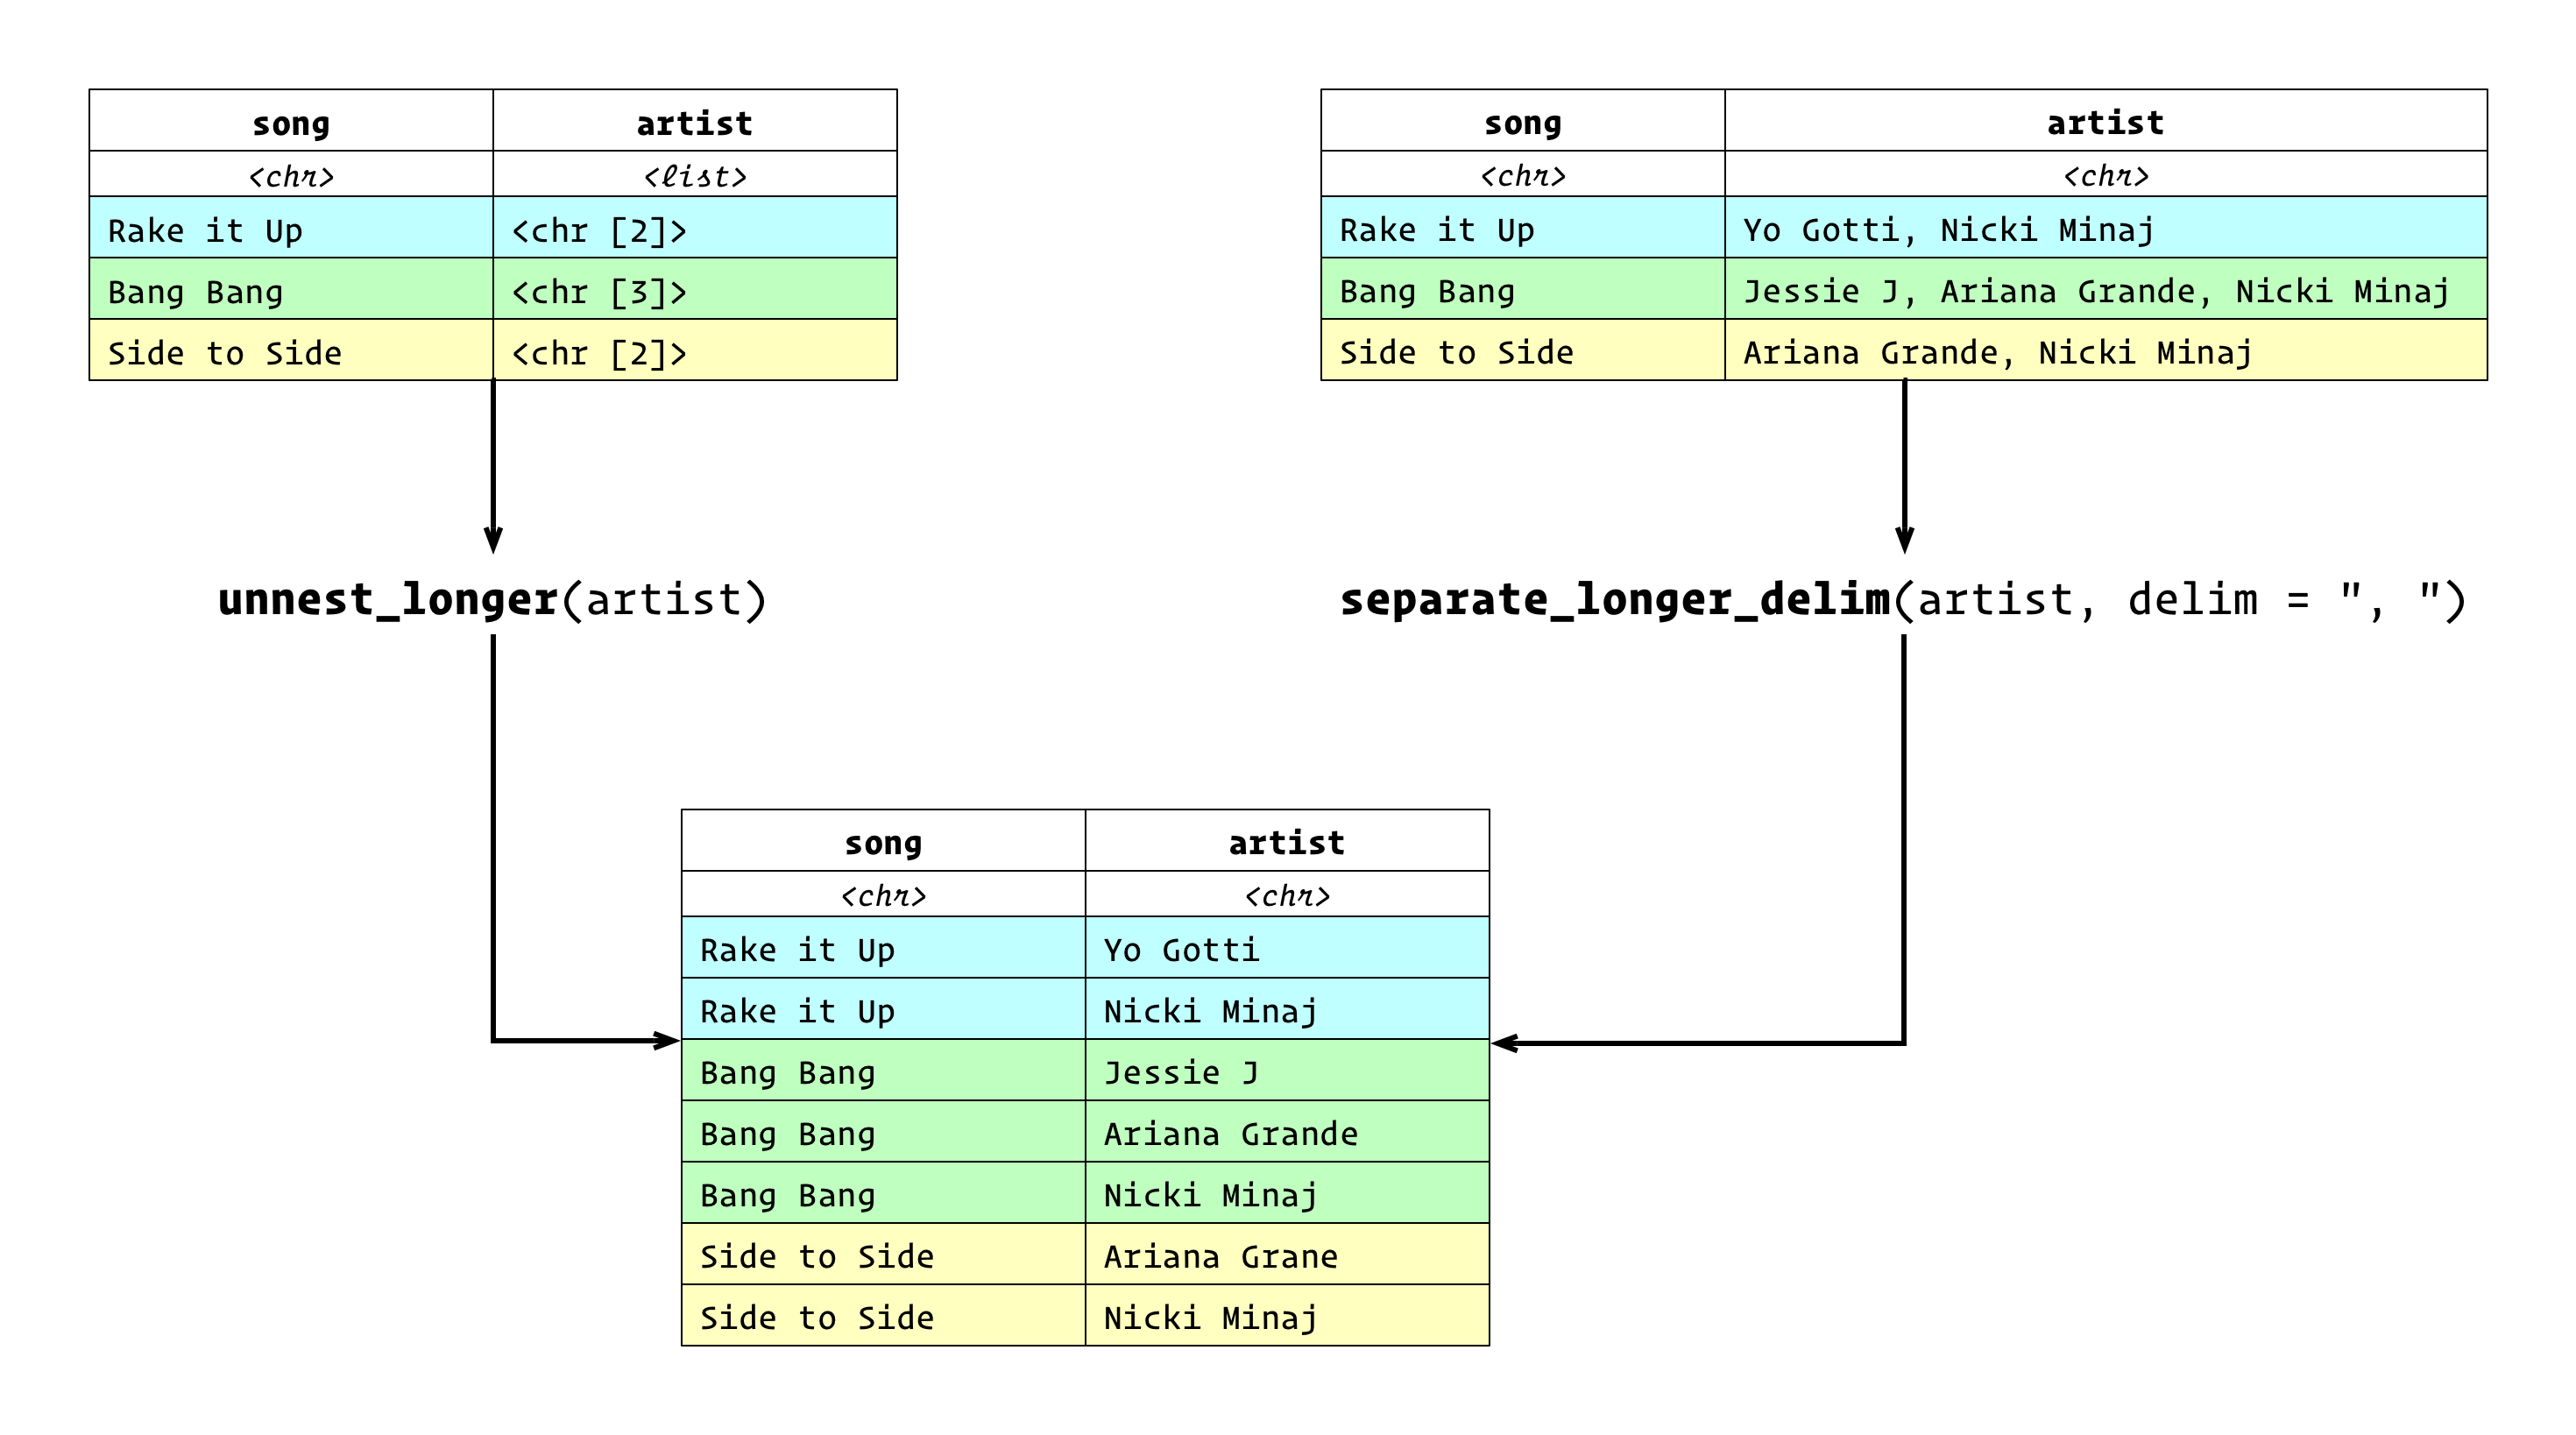 A nested data frame (left), with a song character column, and a an artist list column is transformed into a data frame with one artist and song per row by using the unnest_longer() function. A data frame (right) with two character columns, song and artist, that contains multiple artists in the artist column as a string separated by commas is transformed into a tidy data frame with one song per row and one artist per row using separate_longer_delim().